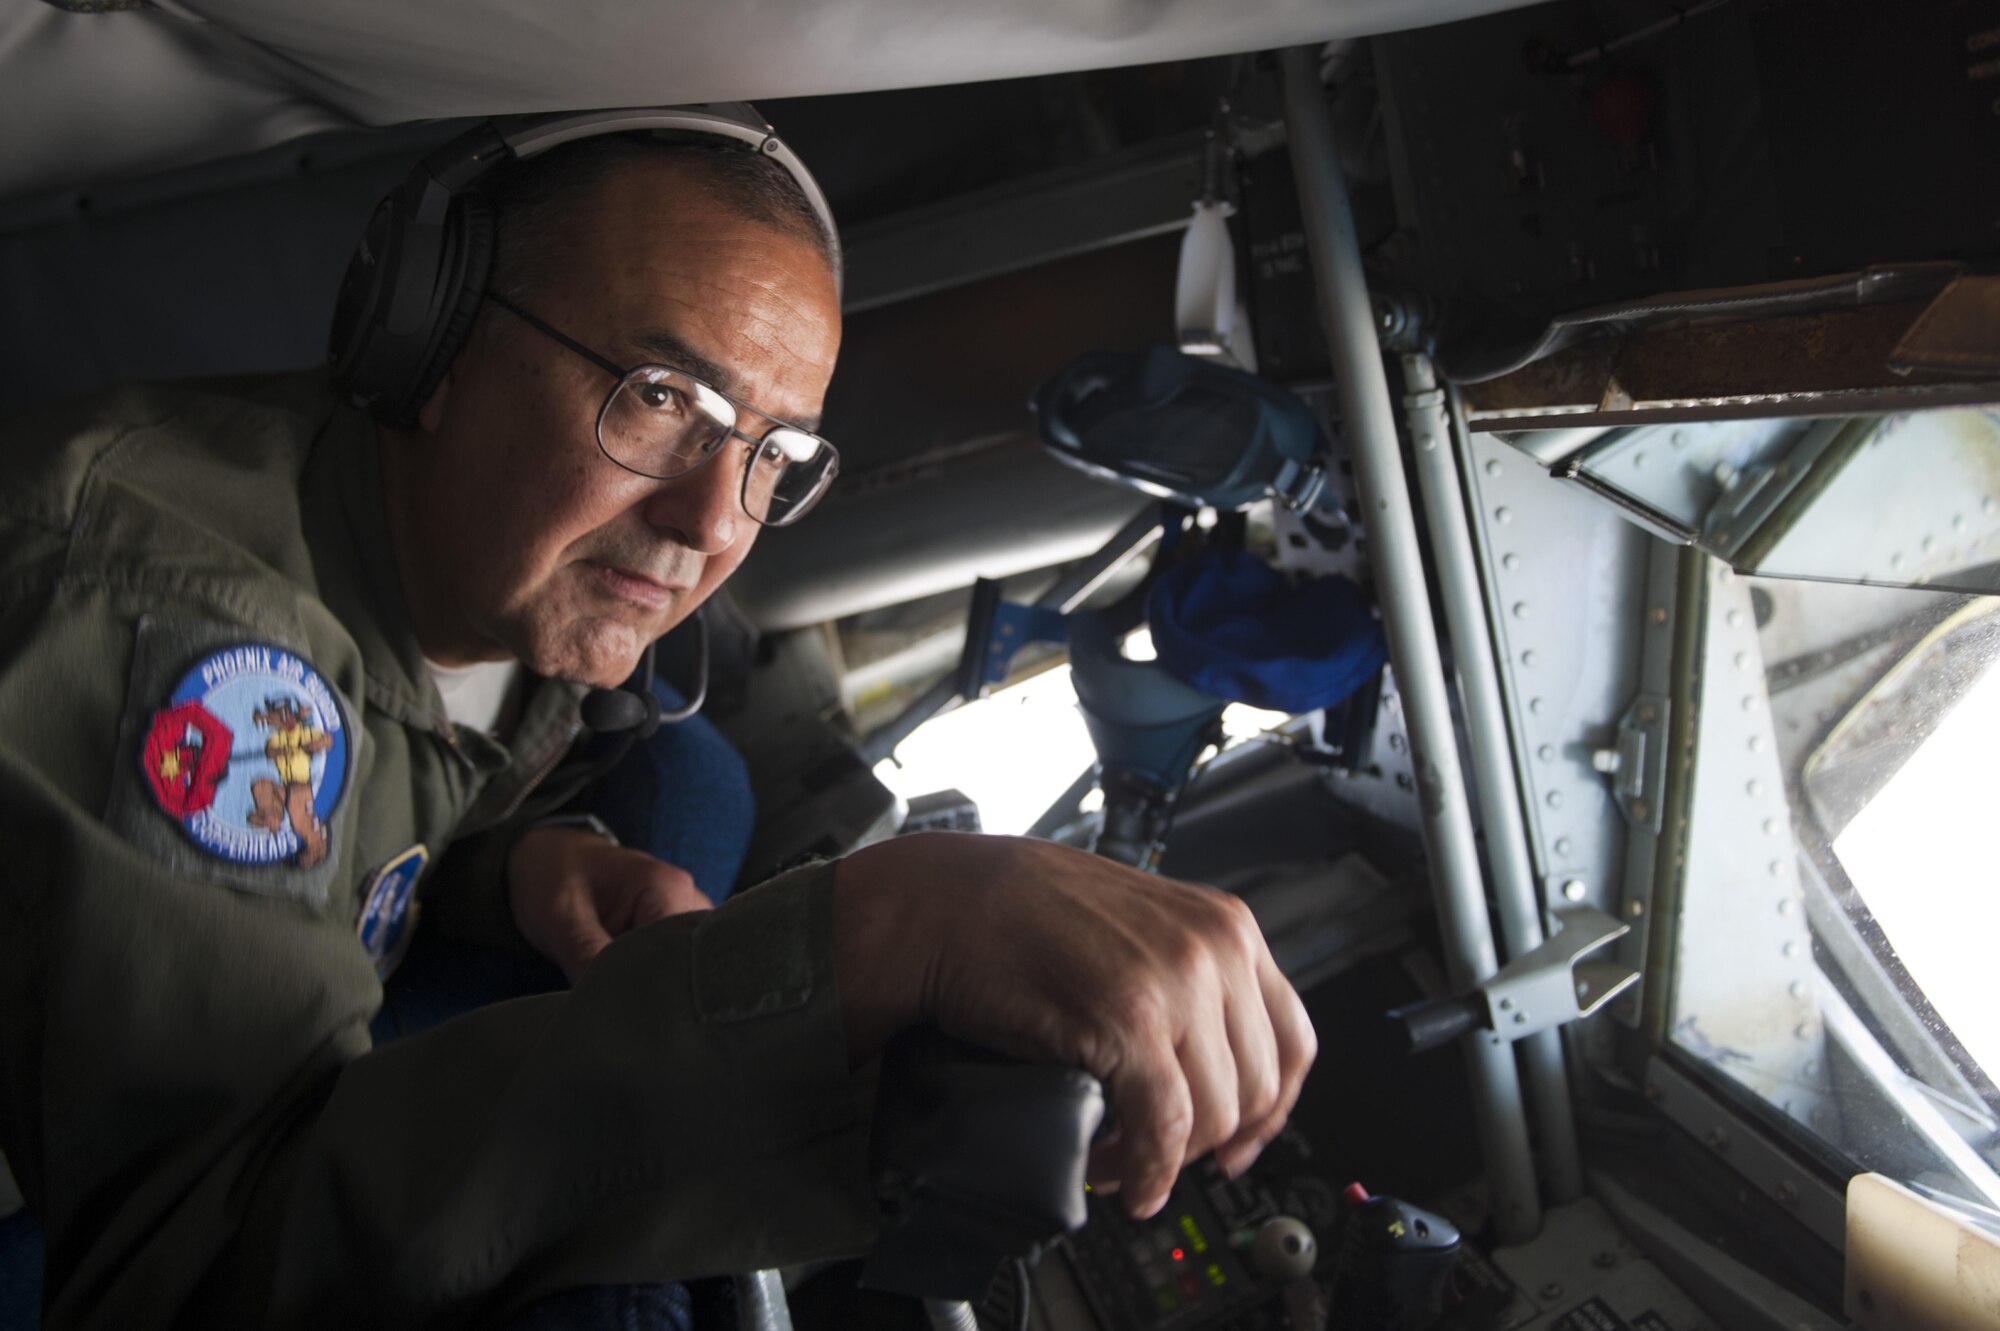 Chief Master Sgt. Carlos Trujillo, 161st Air Refueling Wing boom operator, Arizona Air National Guard, prepares to refuel 61st Fighter Squadron F-35 Lightning IIs, June 5, 2015. Air-to-air refueling allows pilots to extend the combat radius of their aircraft. (U.S. Air Force photo by Staff Sgt. Staci Miller)